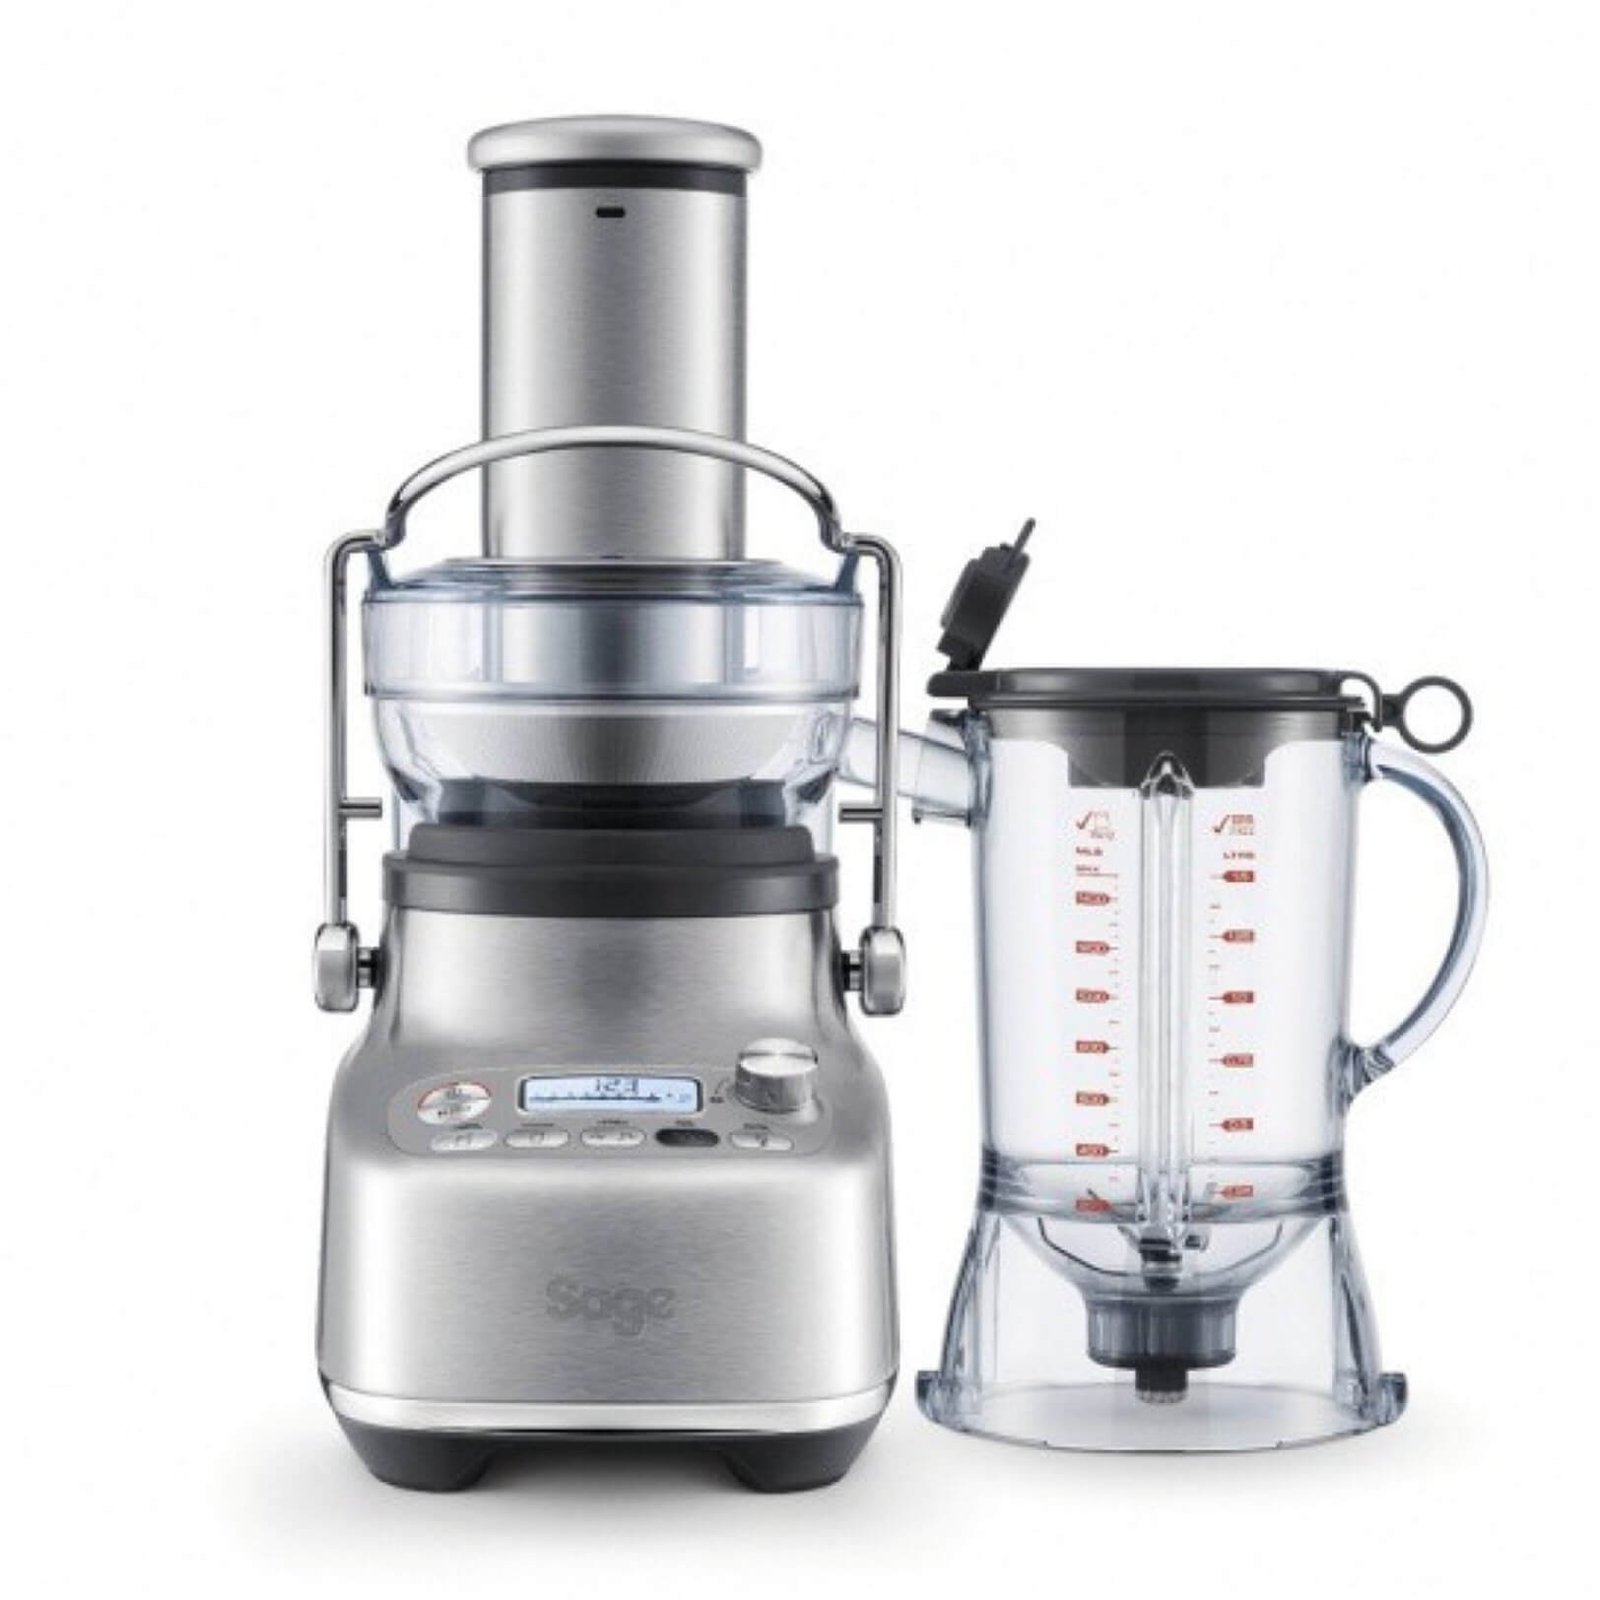 Experience the ultimate in versatility with the Sage 3X Bluicer Pro, the juicer that doubles as a blender. Enjoy the best of both worlds with this innovative kitchen must-have.